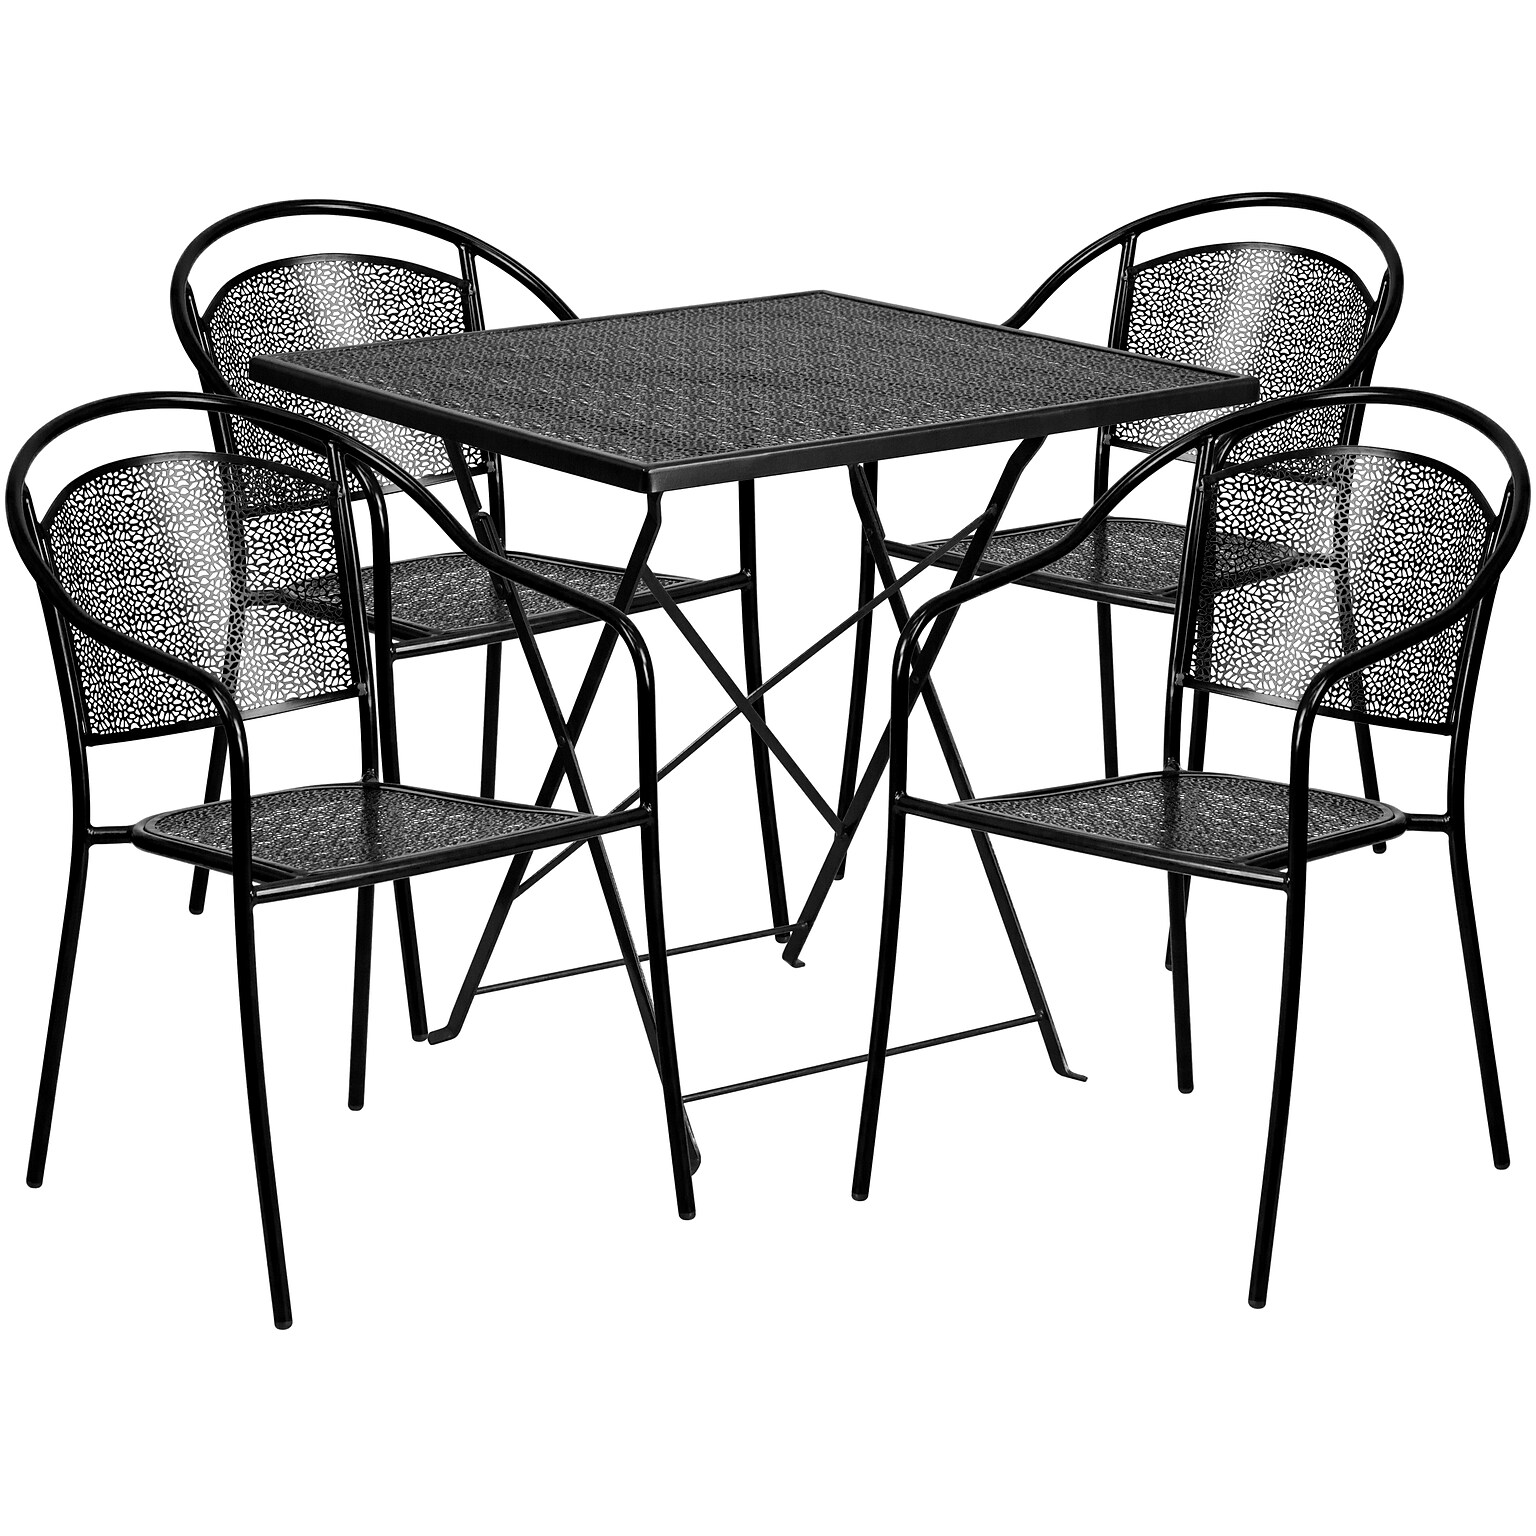 Flash Furniture Oia Indoor-Outdoor 28 Square Steel Folding Patio Table Set with 4 Round Back Chairs, Black (CO28SQF03CHR4BK)